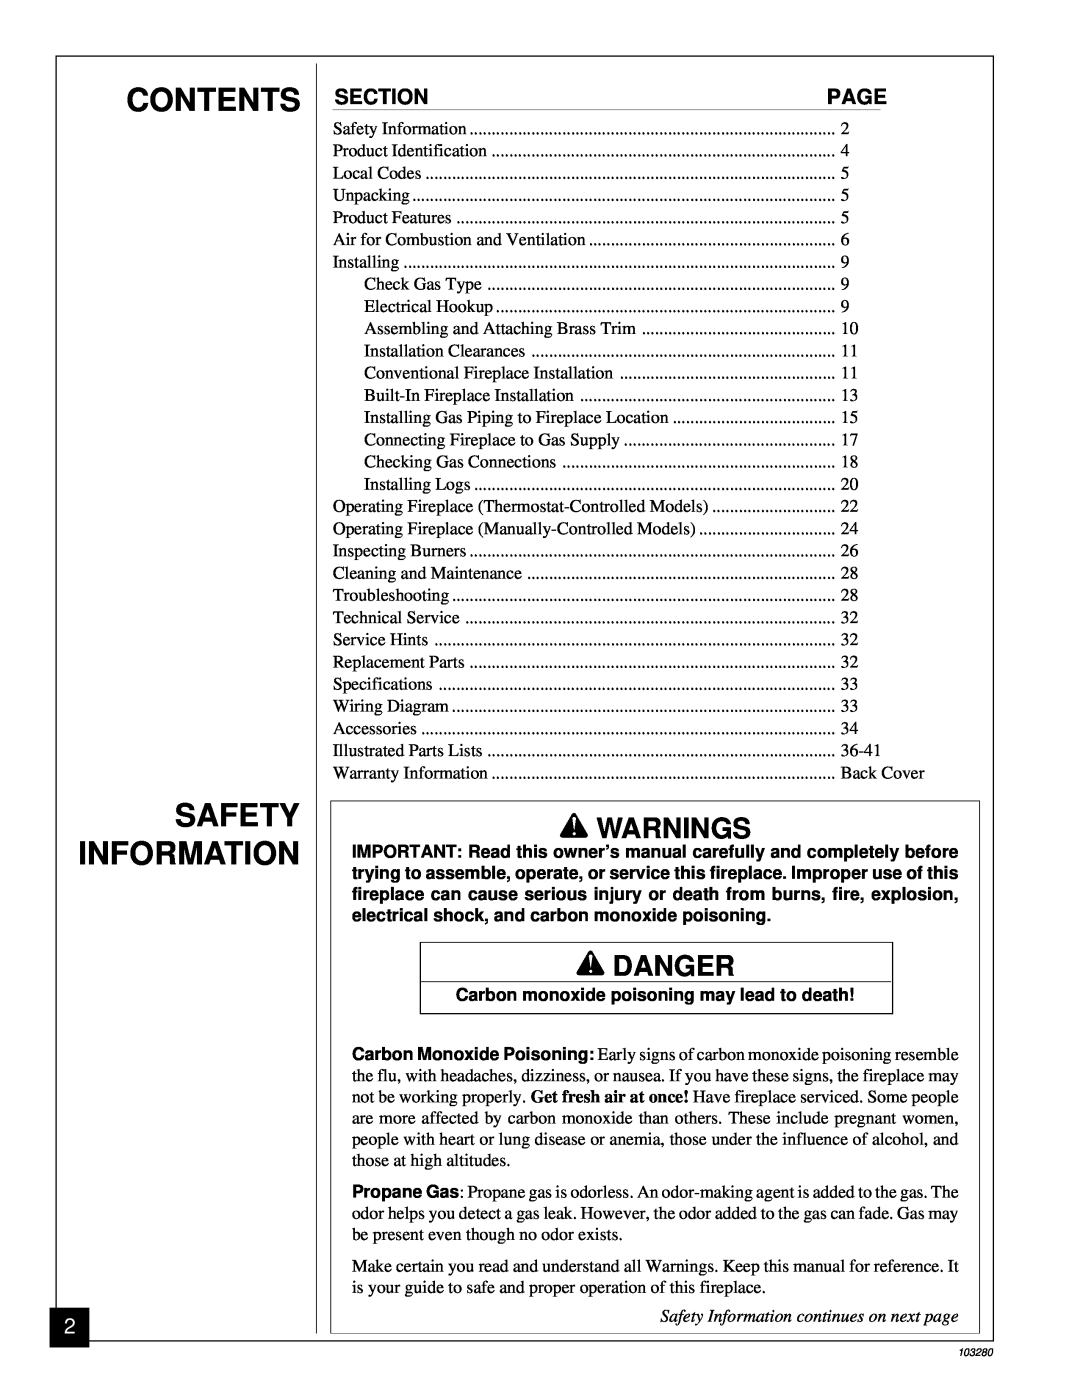 Desa FPVF33PR Contents Safety Information, Warnings, Danger, Section, Page, Carbon monoxide poisoning may lead to death 